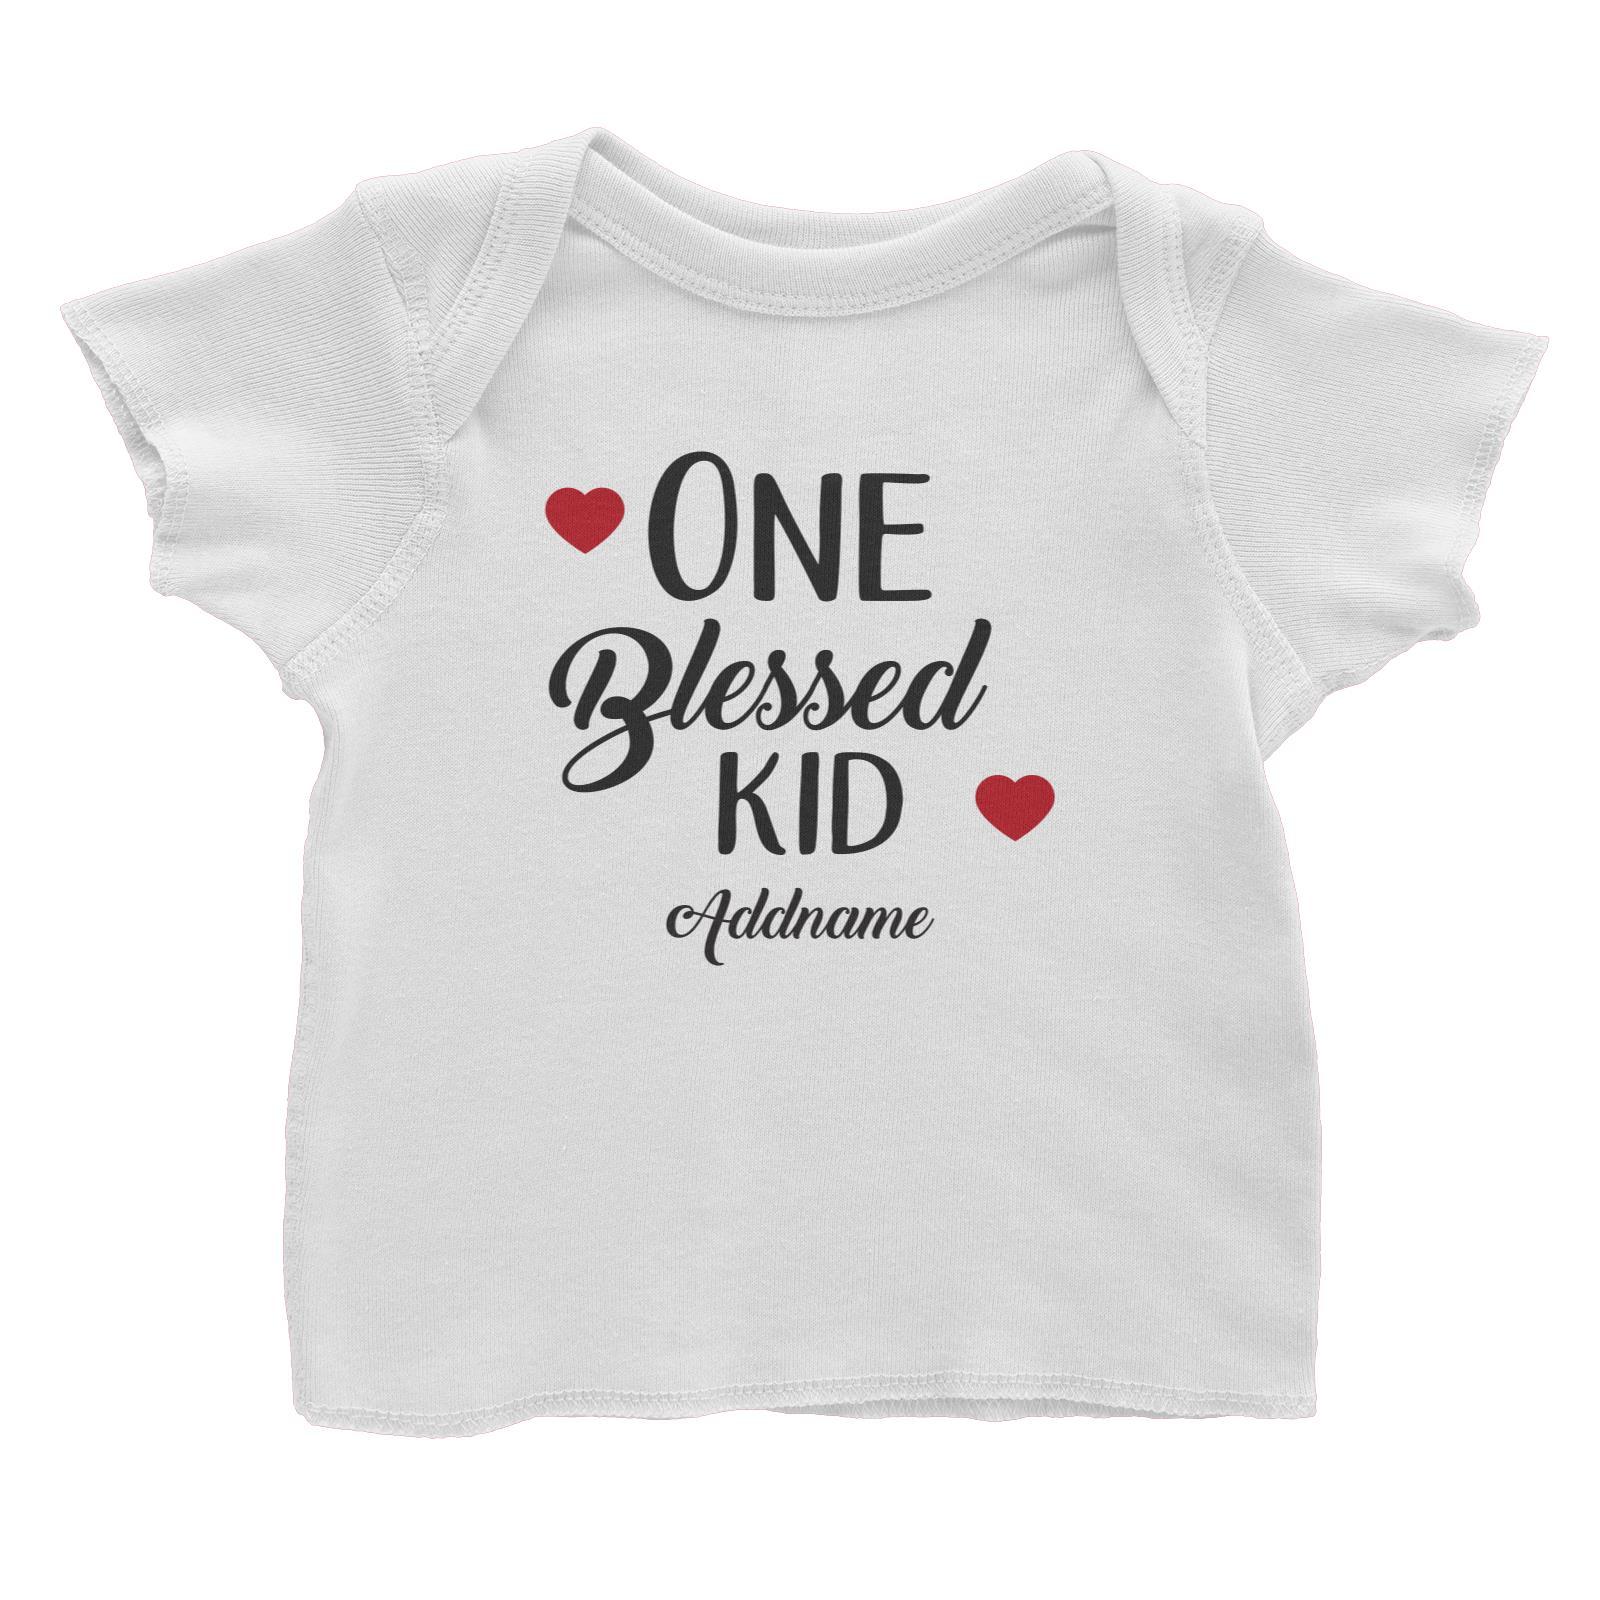 Christian Series One Blessed Kid Addname Baby T-Shirt